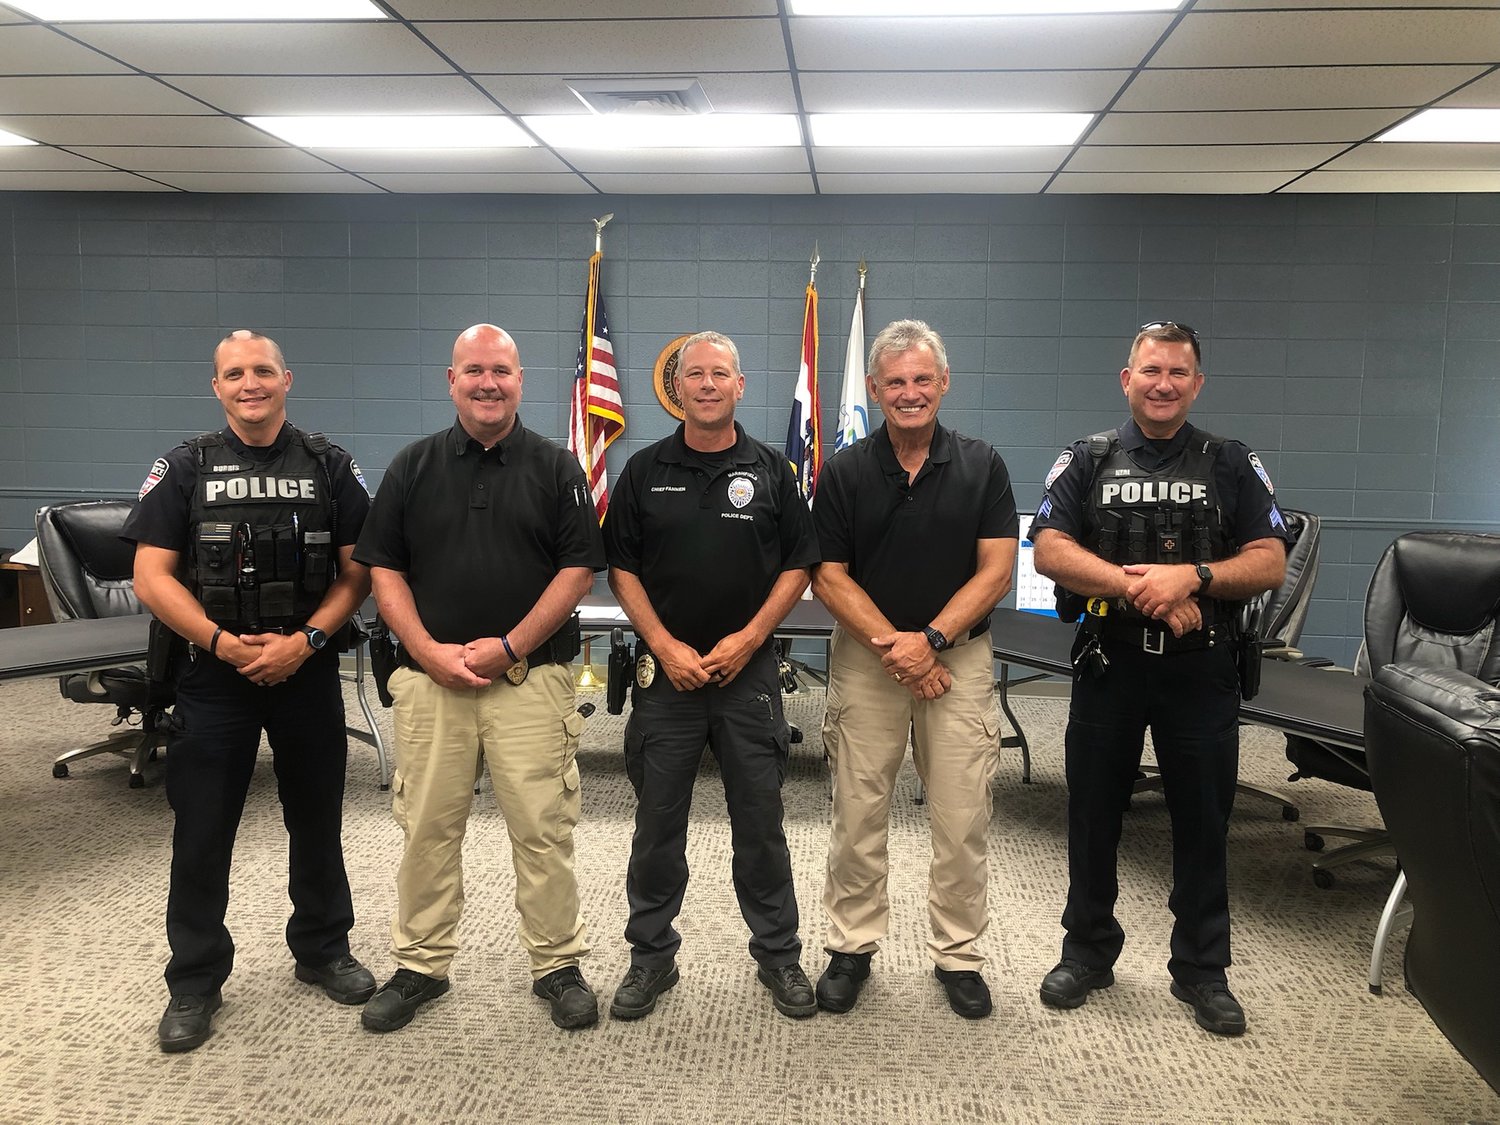 Marshfield’s Finest stands together as they welcome a Rick Hamilton as their newest on-reserve detective. “We are so lucky to have Hamilton, he has about 25 years experience. He is known for having a pretty hard work ethic and being thorough. We are very grateful, and all our guys are supportive,” shares Marshfield Police Chief Doug Fannen. Pictured from left to right: Officer Josh Burris, Detective Joe Taylor, Chief Doug Fannen, Reserve Detective Rick Hamilton, and Sergeant Richard Neal.